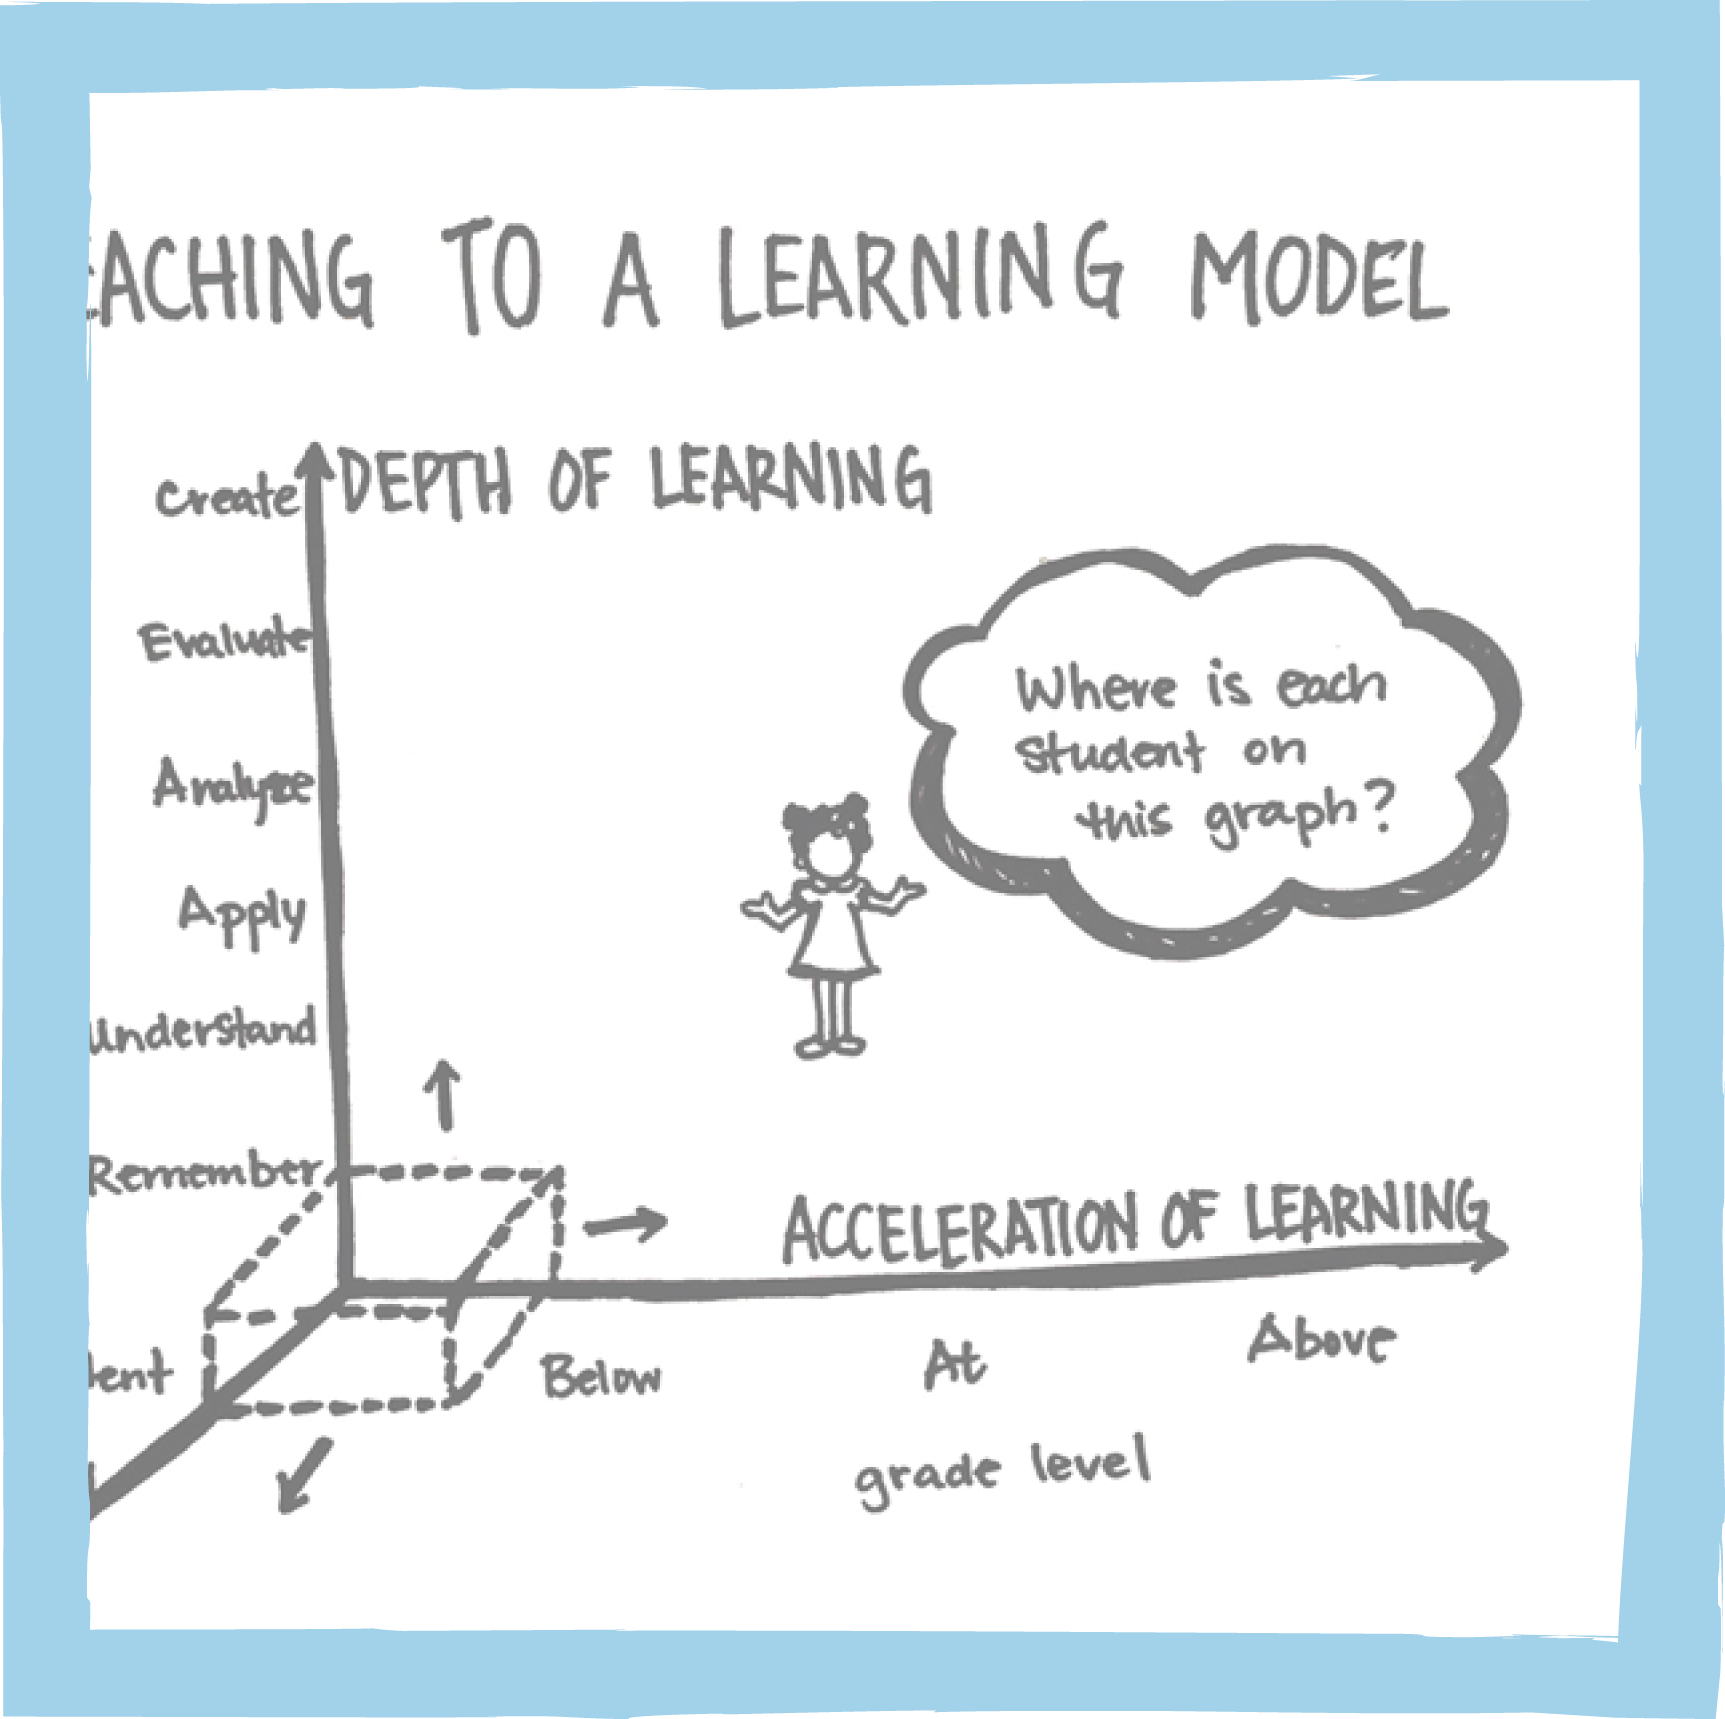 From a teaching model to a learning model